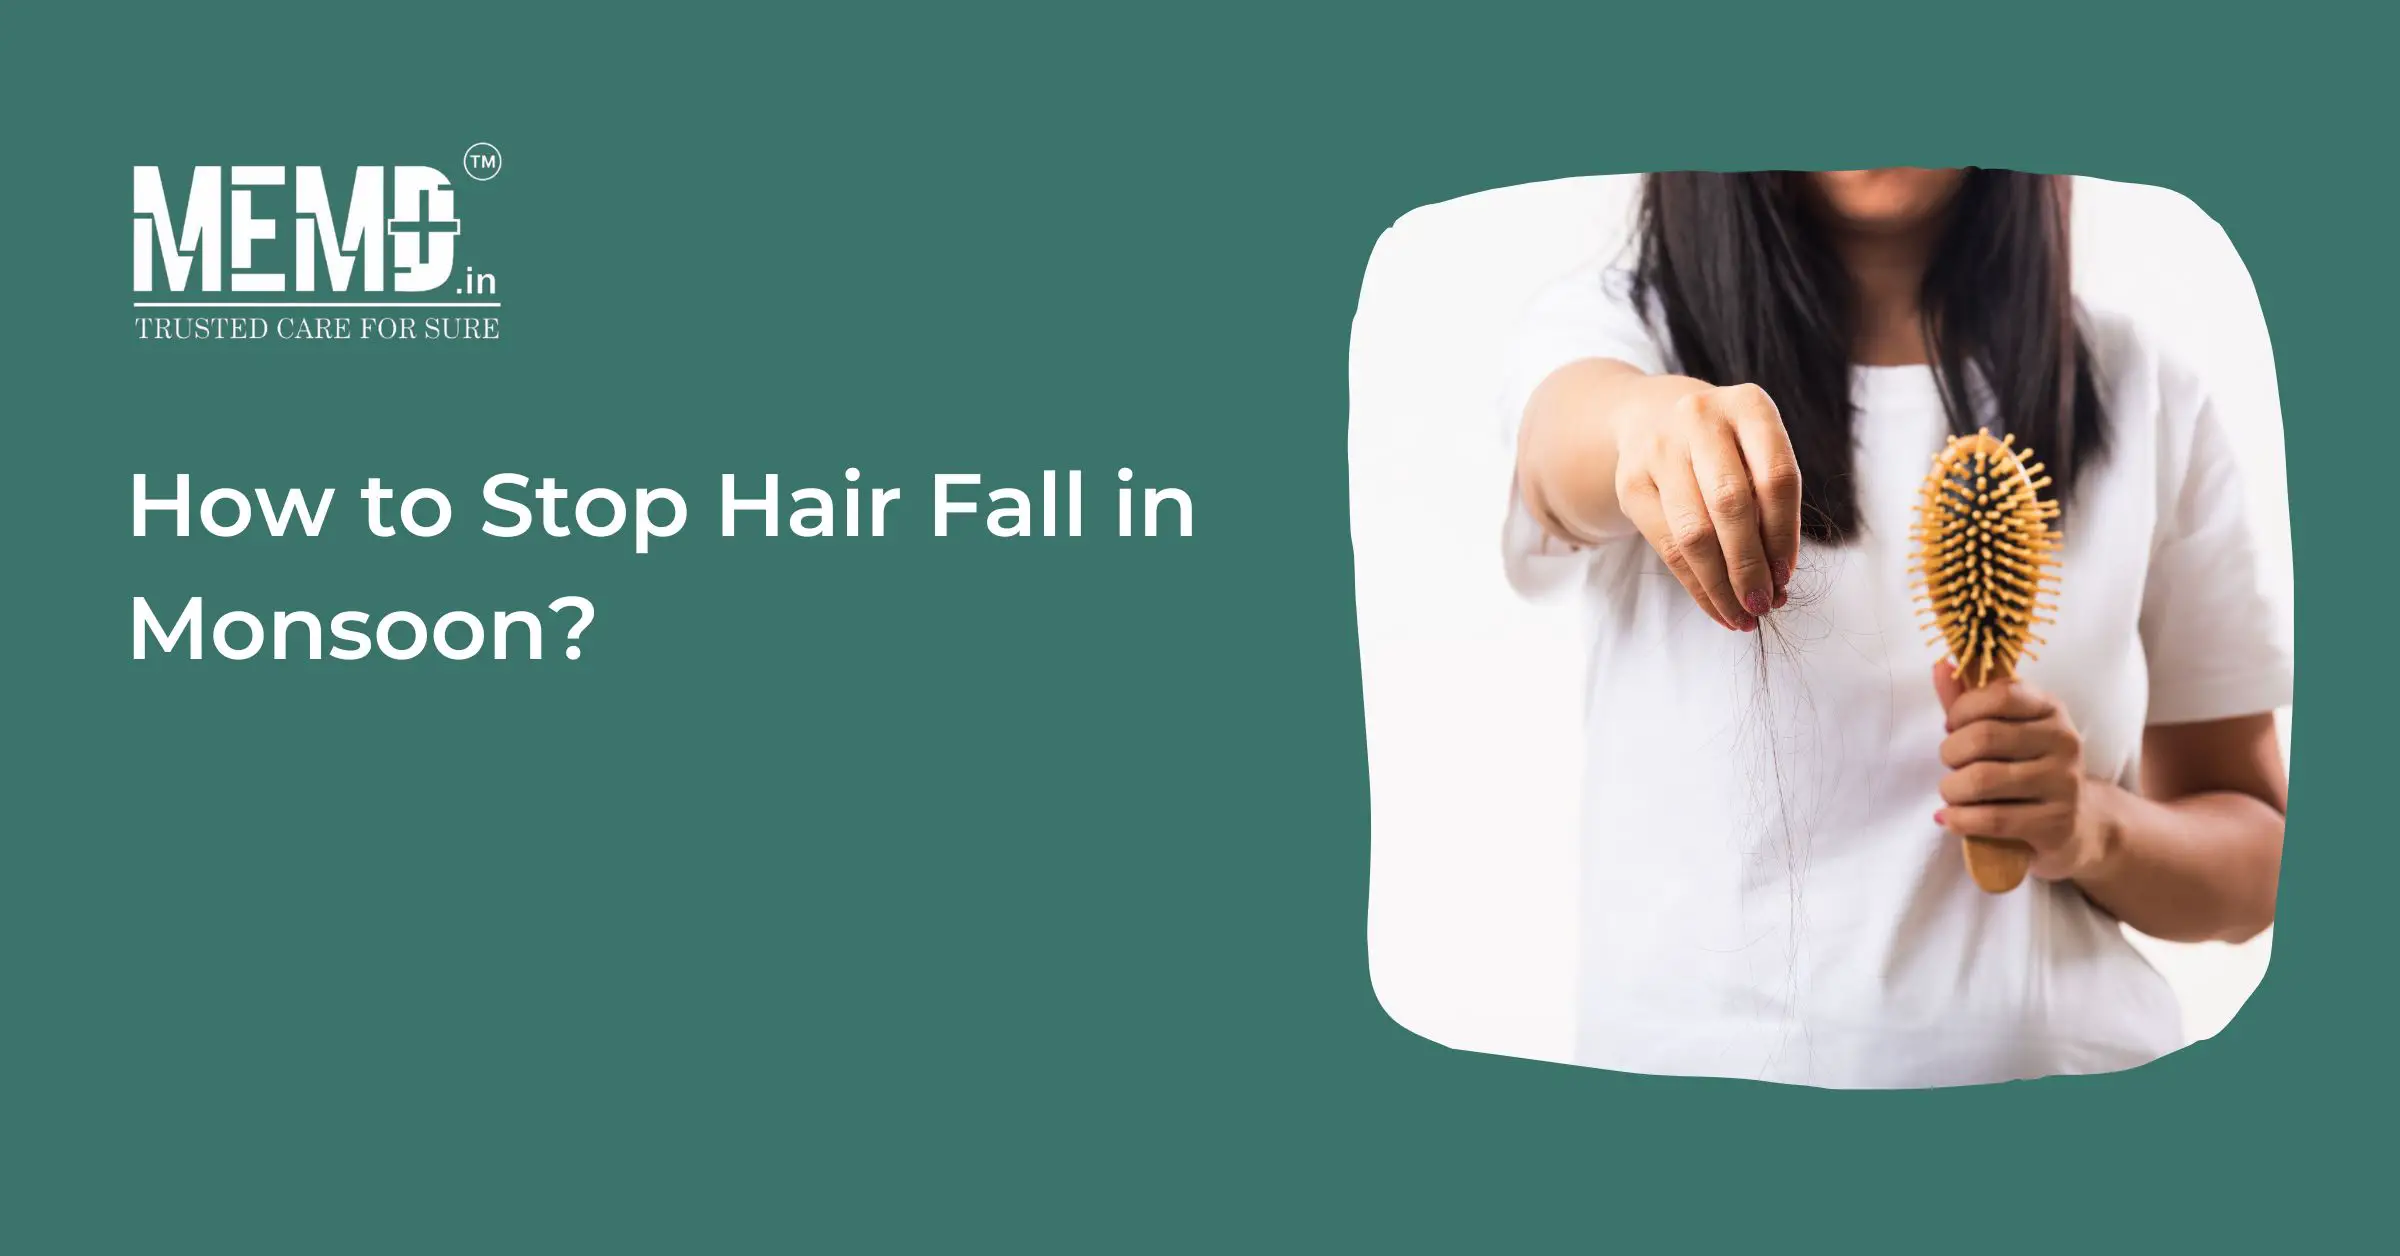 How to Stop Hair Fall in Monsoon